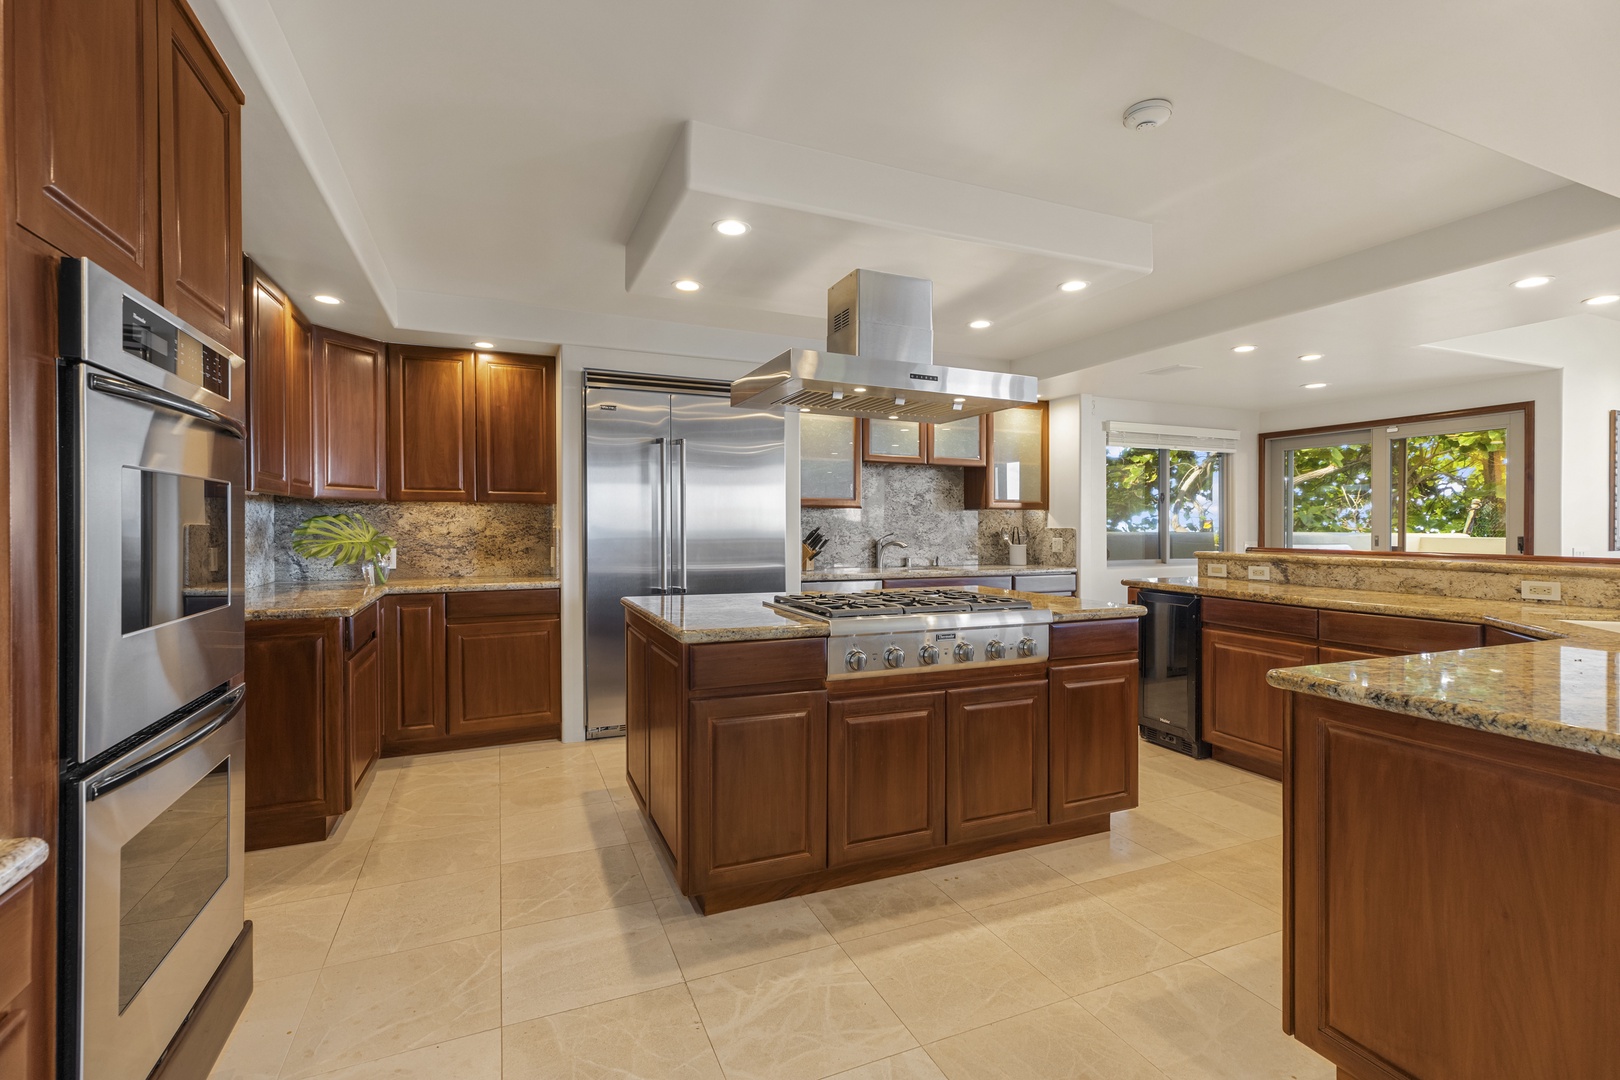 Kailua Vacation Rentals, Mokulua Sunrise - Spacious kitchen with ample breakfast bar seating, center island, and stainless steel appliances